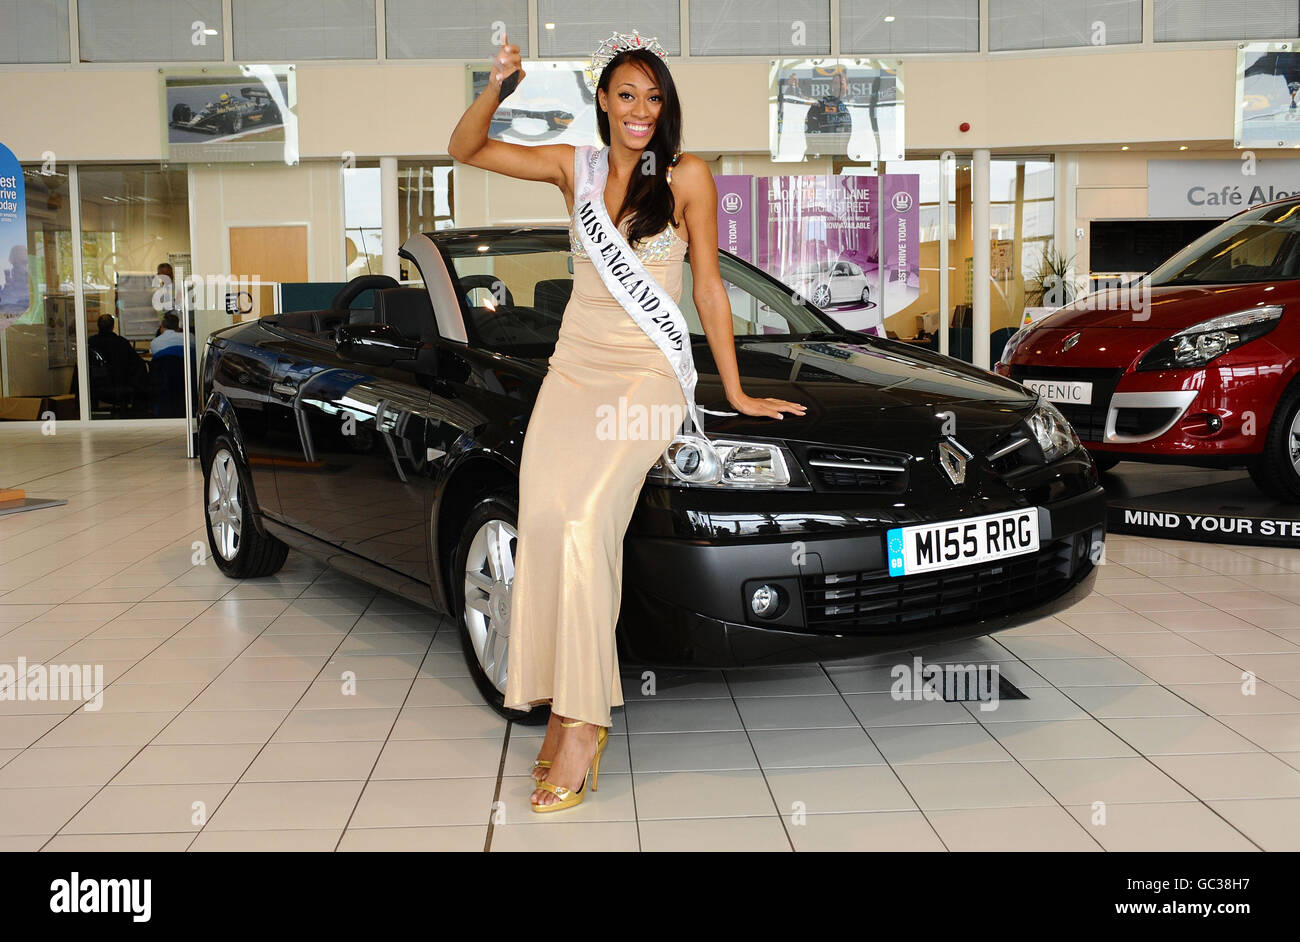 Miss England Rachel Christie receives the key to her new Renault Coupe Cabriolet, complete with personalised number plate (standing for Miss Renault Retail Group), from Renault London West. Rachel will keep the car until the end of her reign as Miss England. Stock Photo